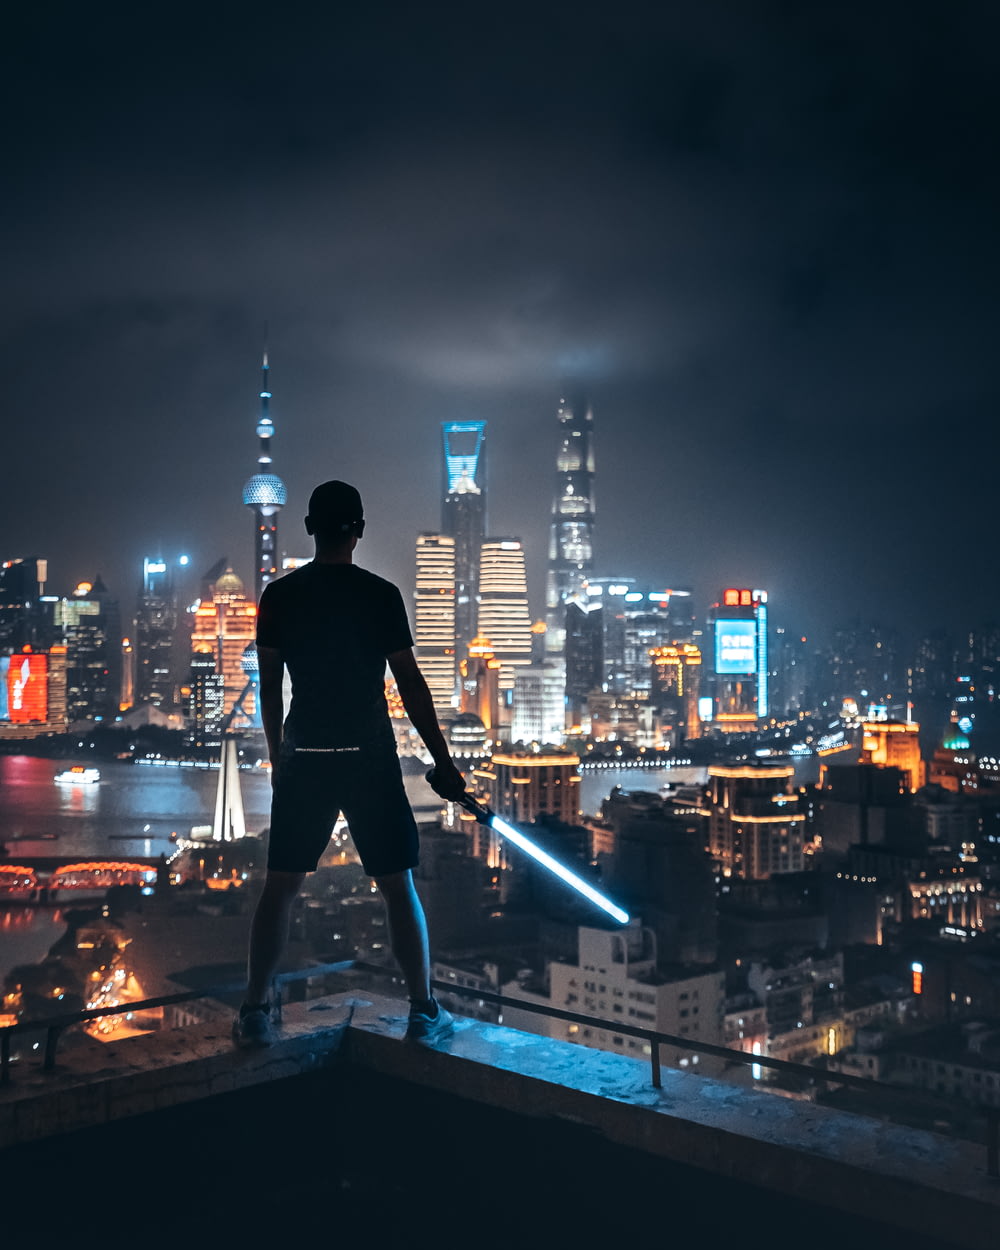 man holding lightsaber while standing on ledge overlooking city